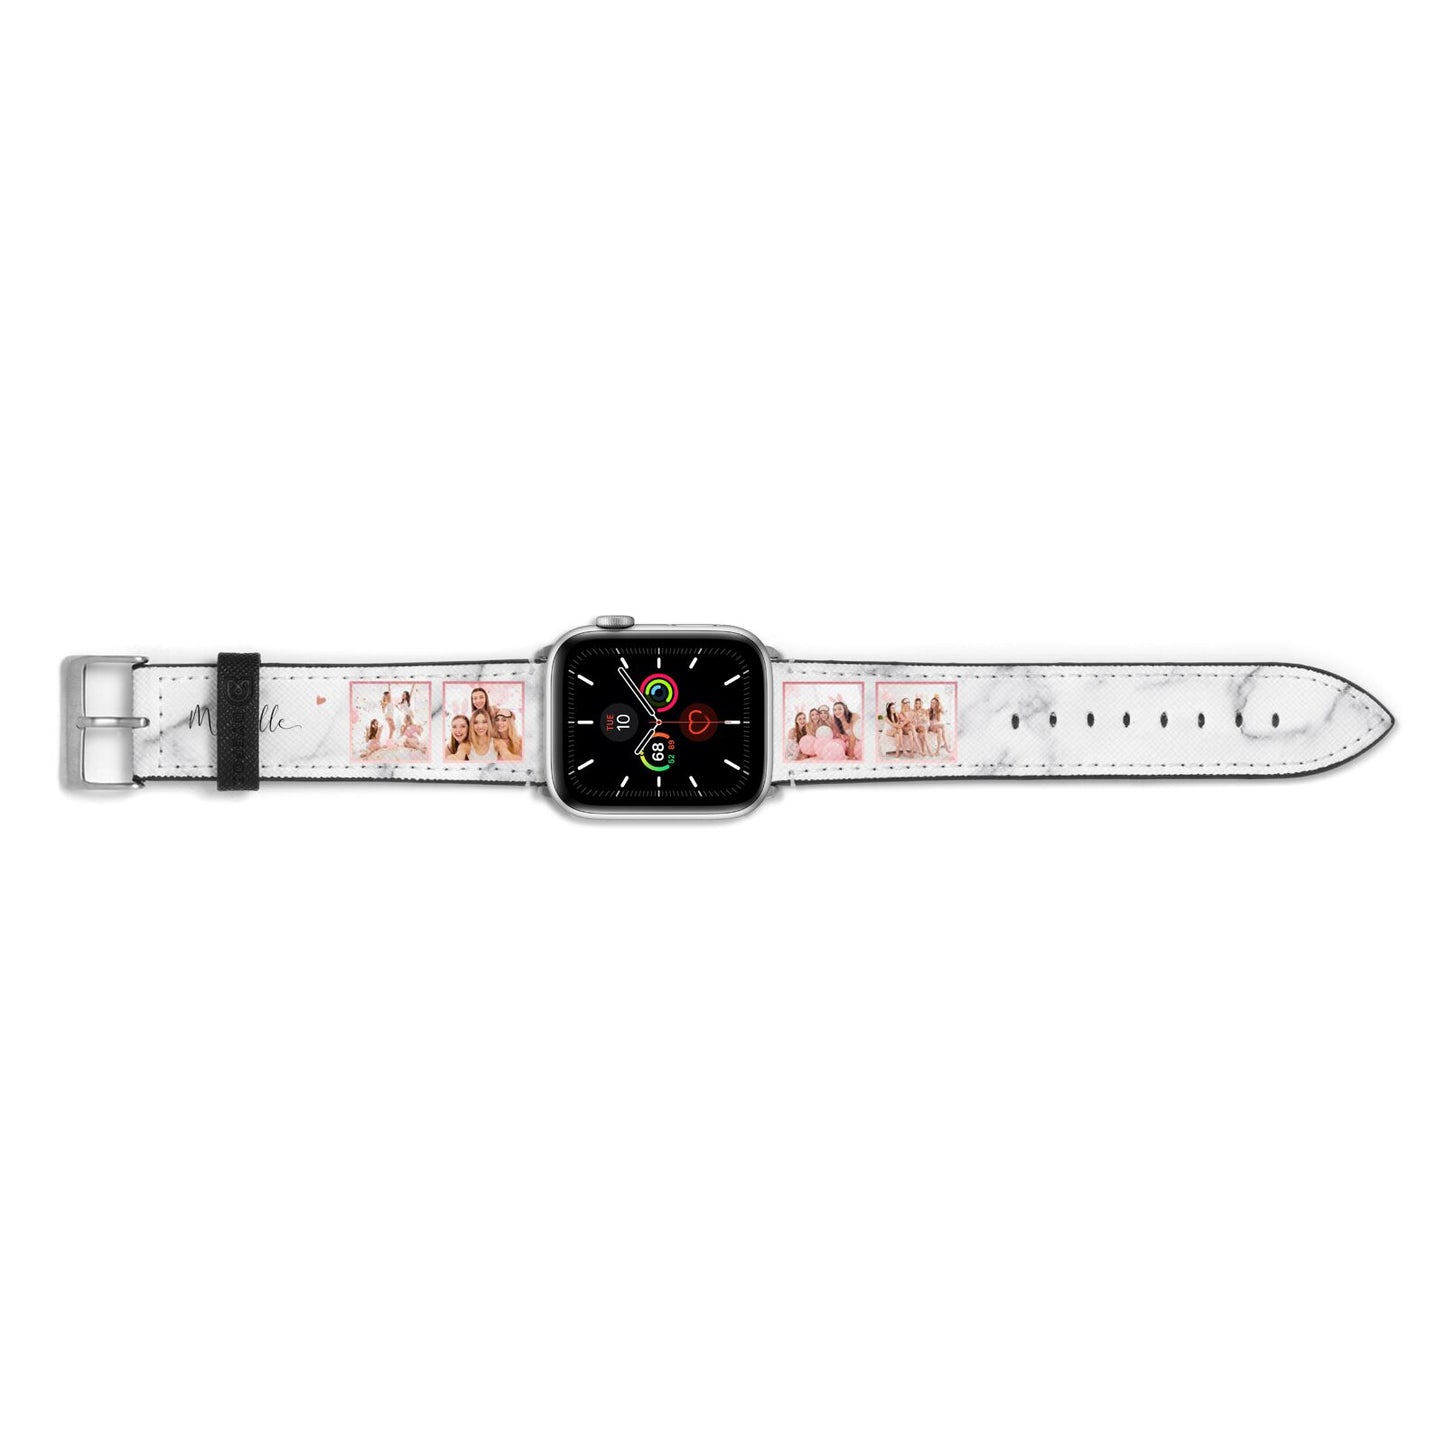 Marble Photo Strip Personalised Apple Watch Strap Landscape Image Silver Hardware